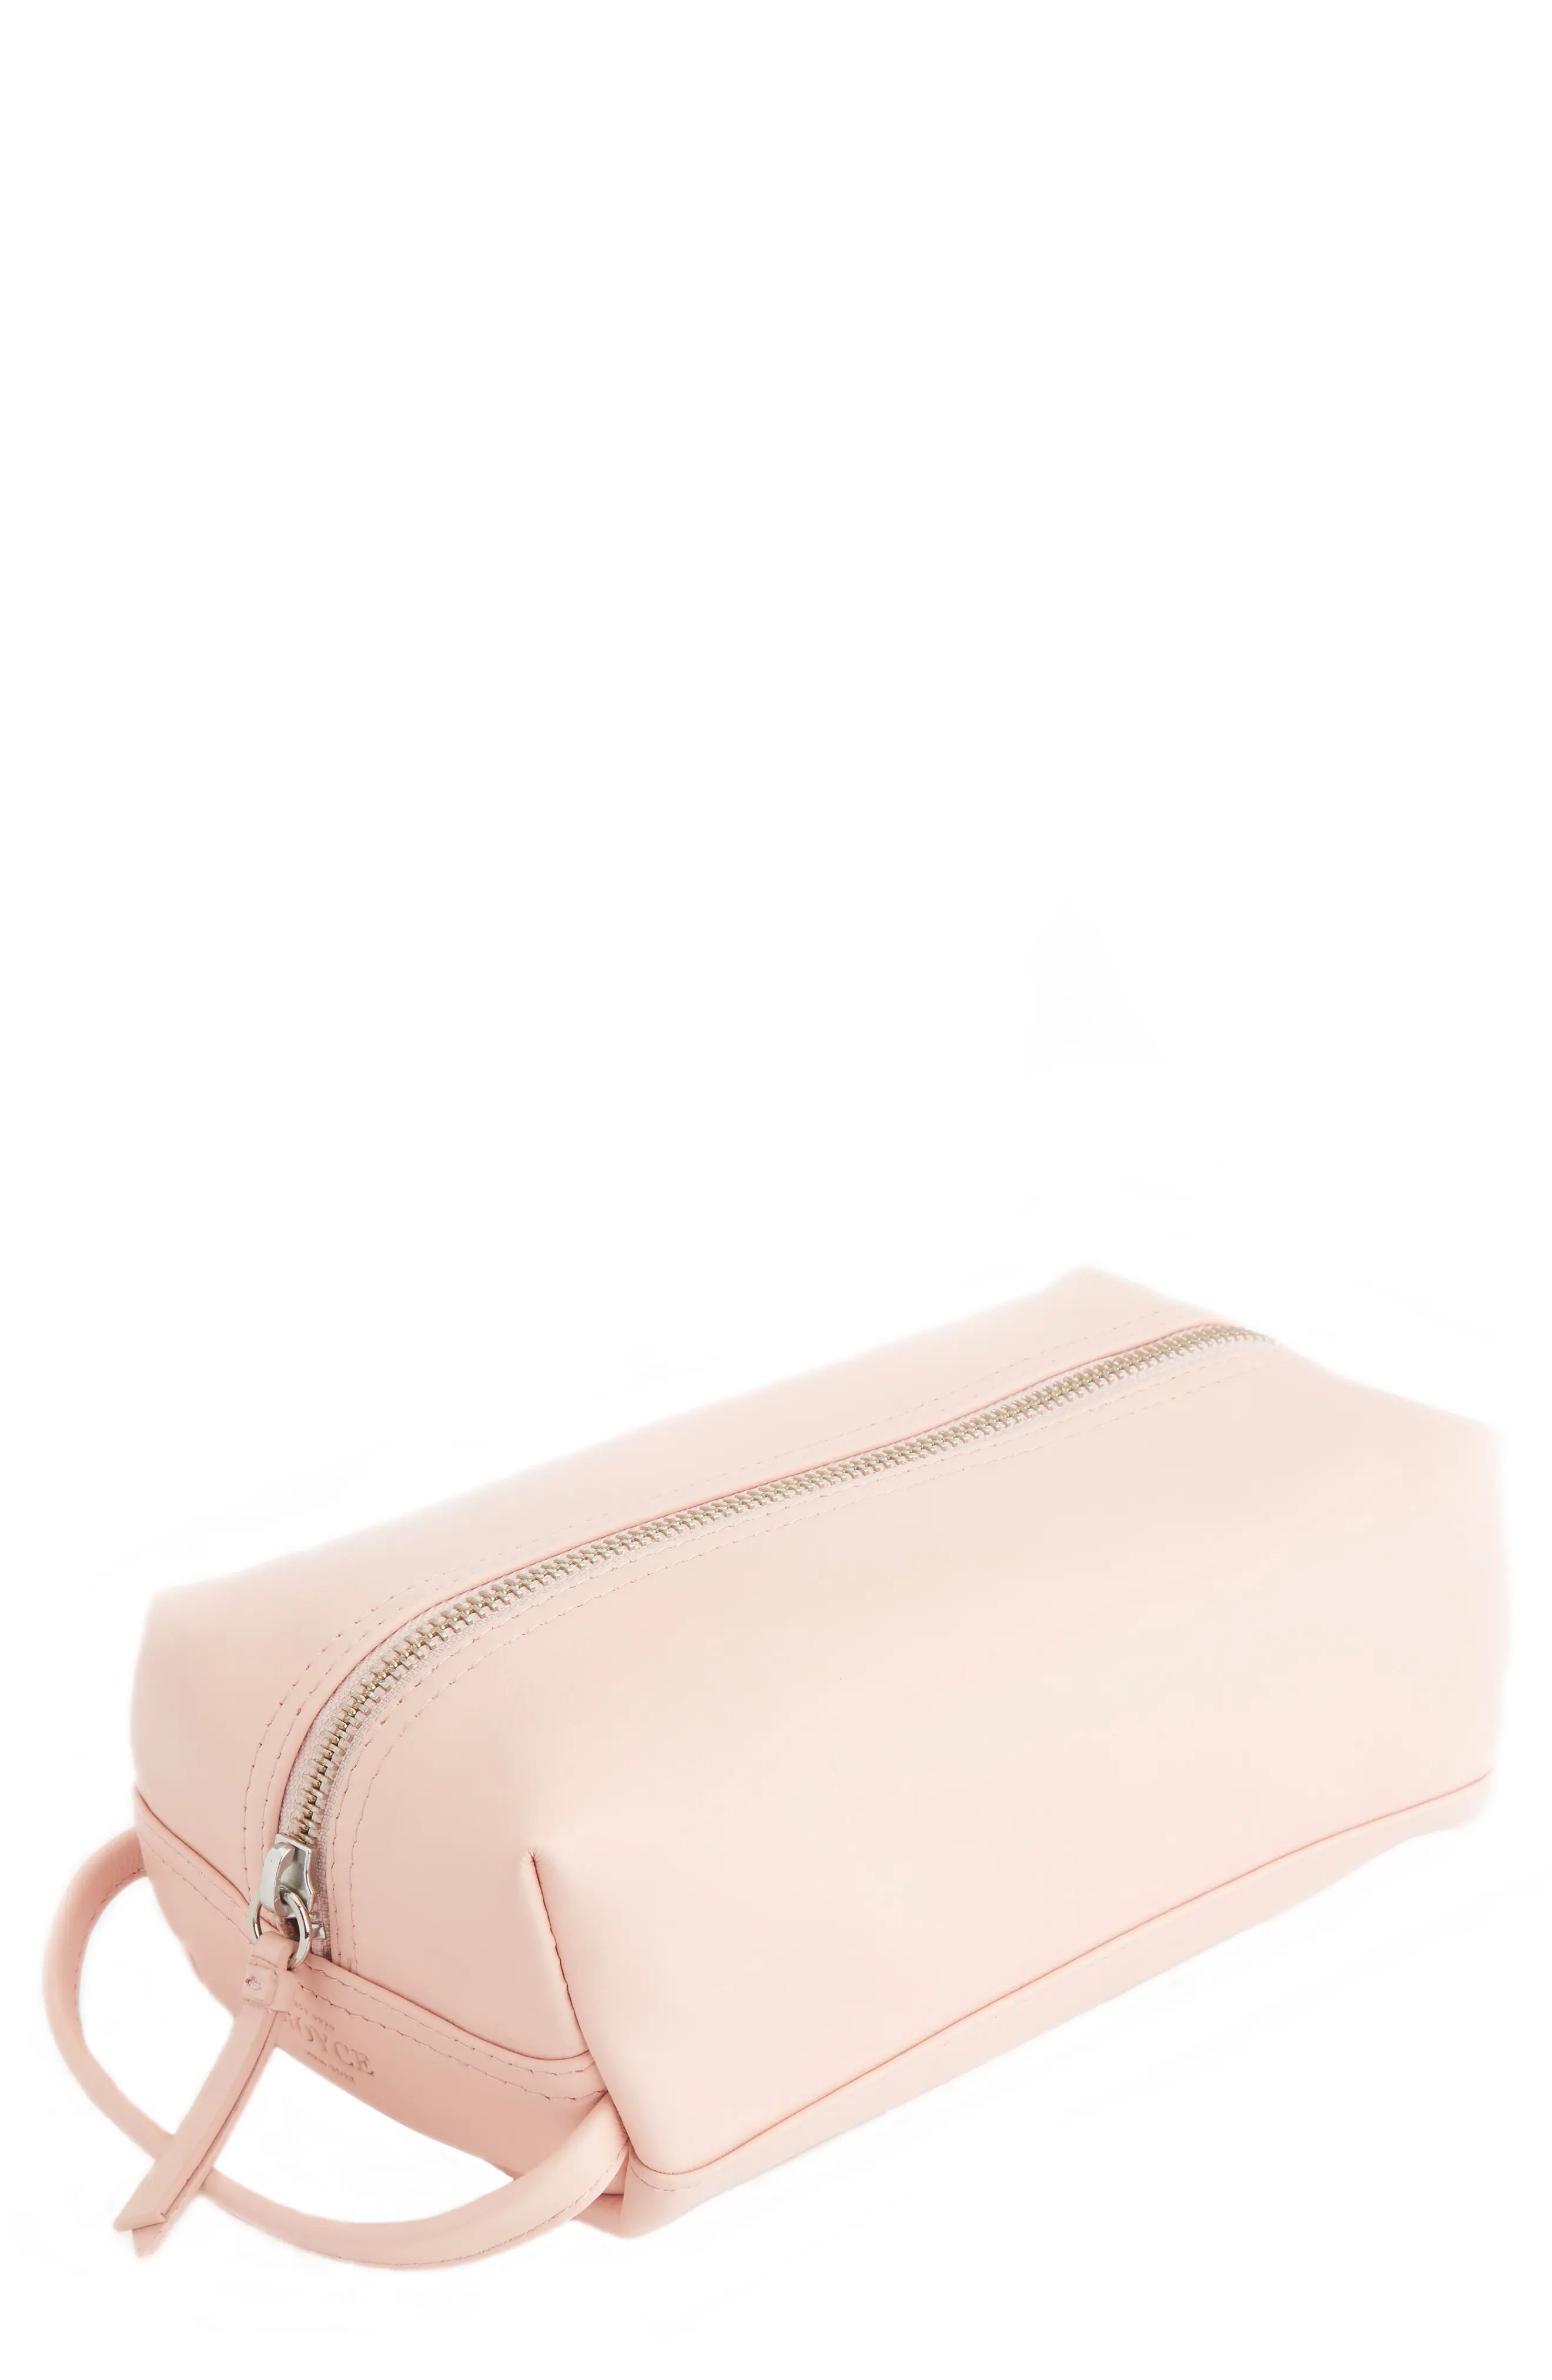 Royce Compact Leather Toiletry Bag, Size One Size - Light Pink | Nordstrom